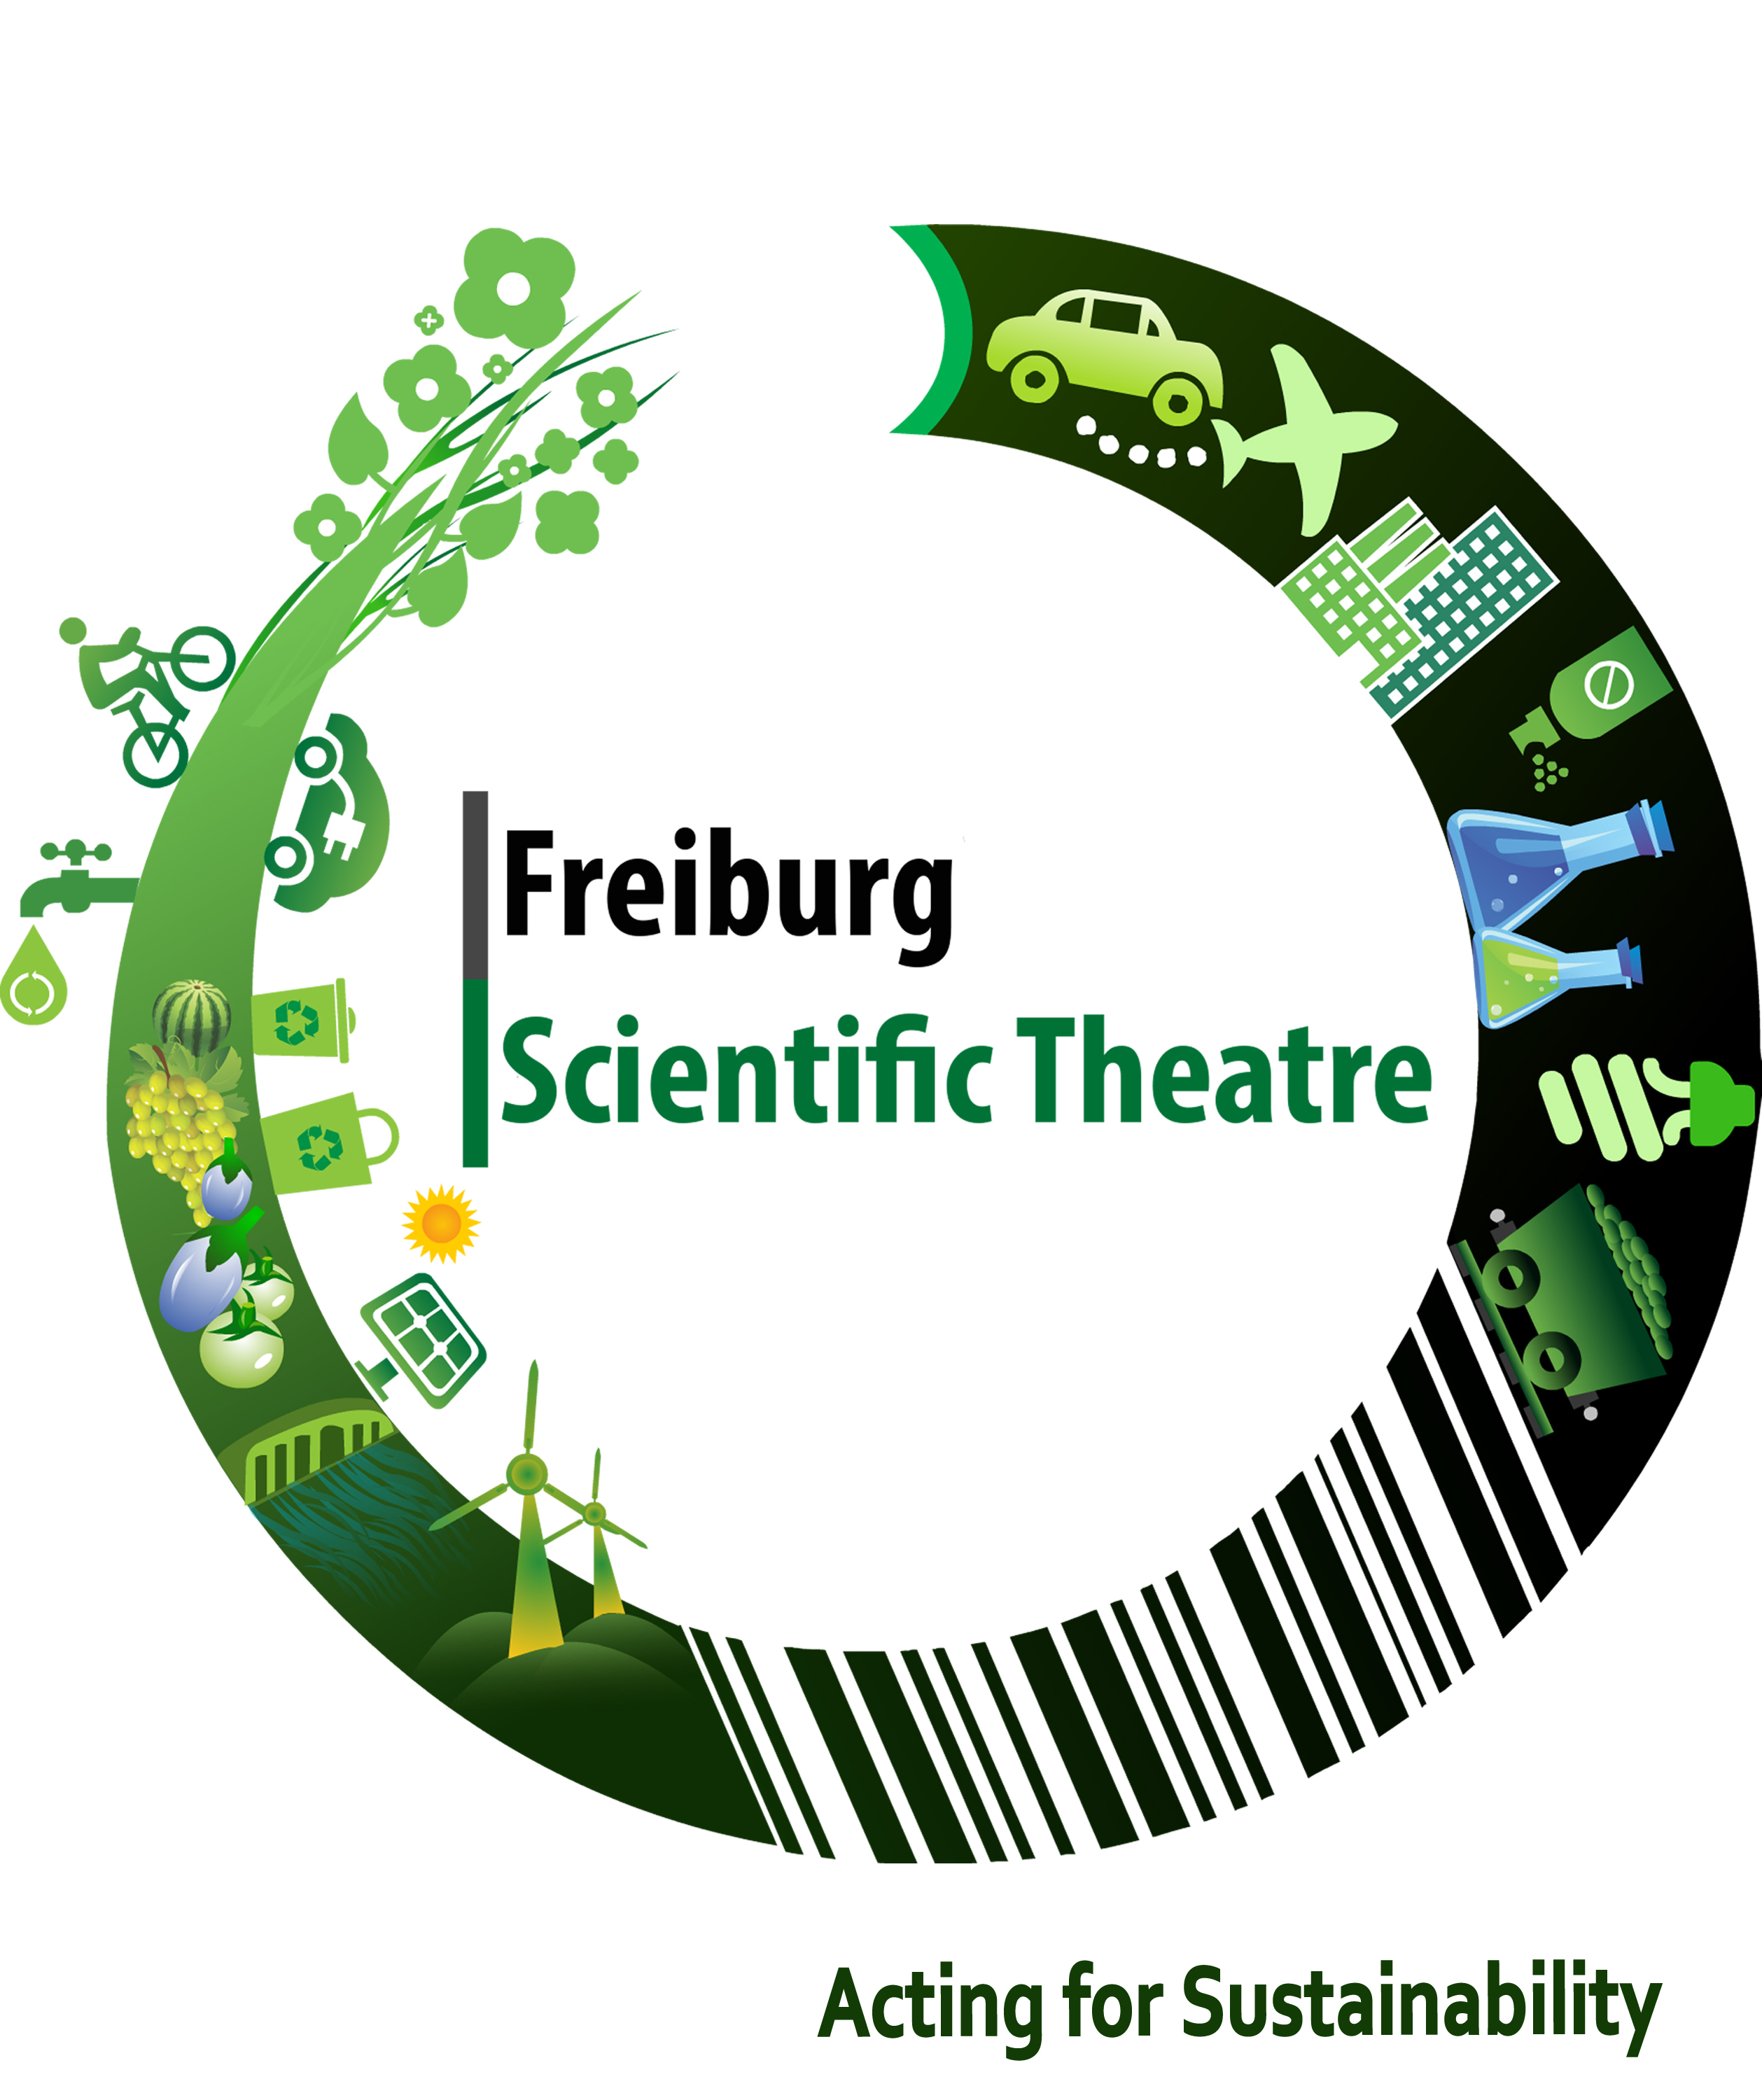 Freiburg Scientific Theatre wins University Grant for Art and Sustainability Programme